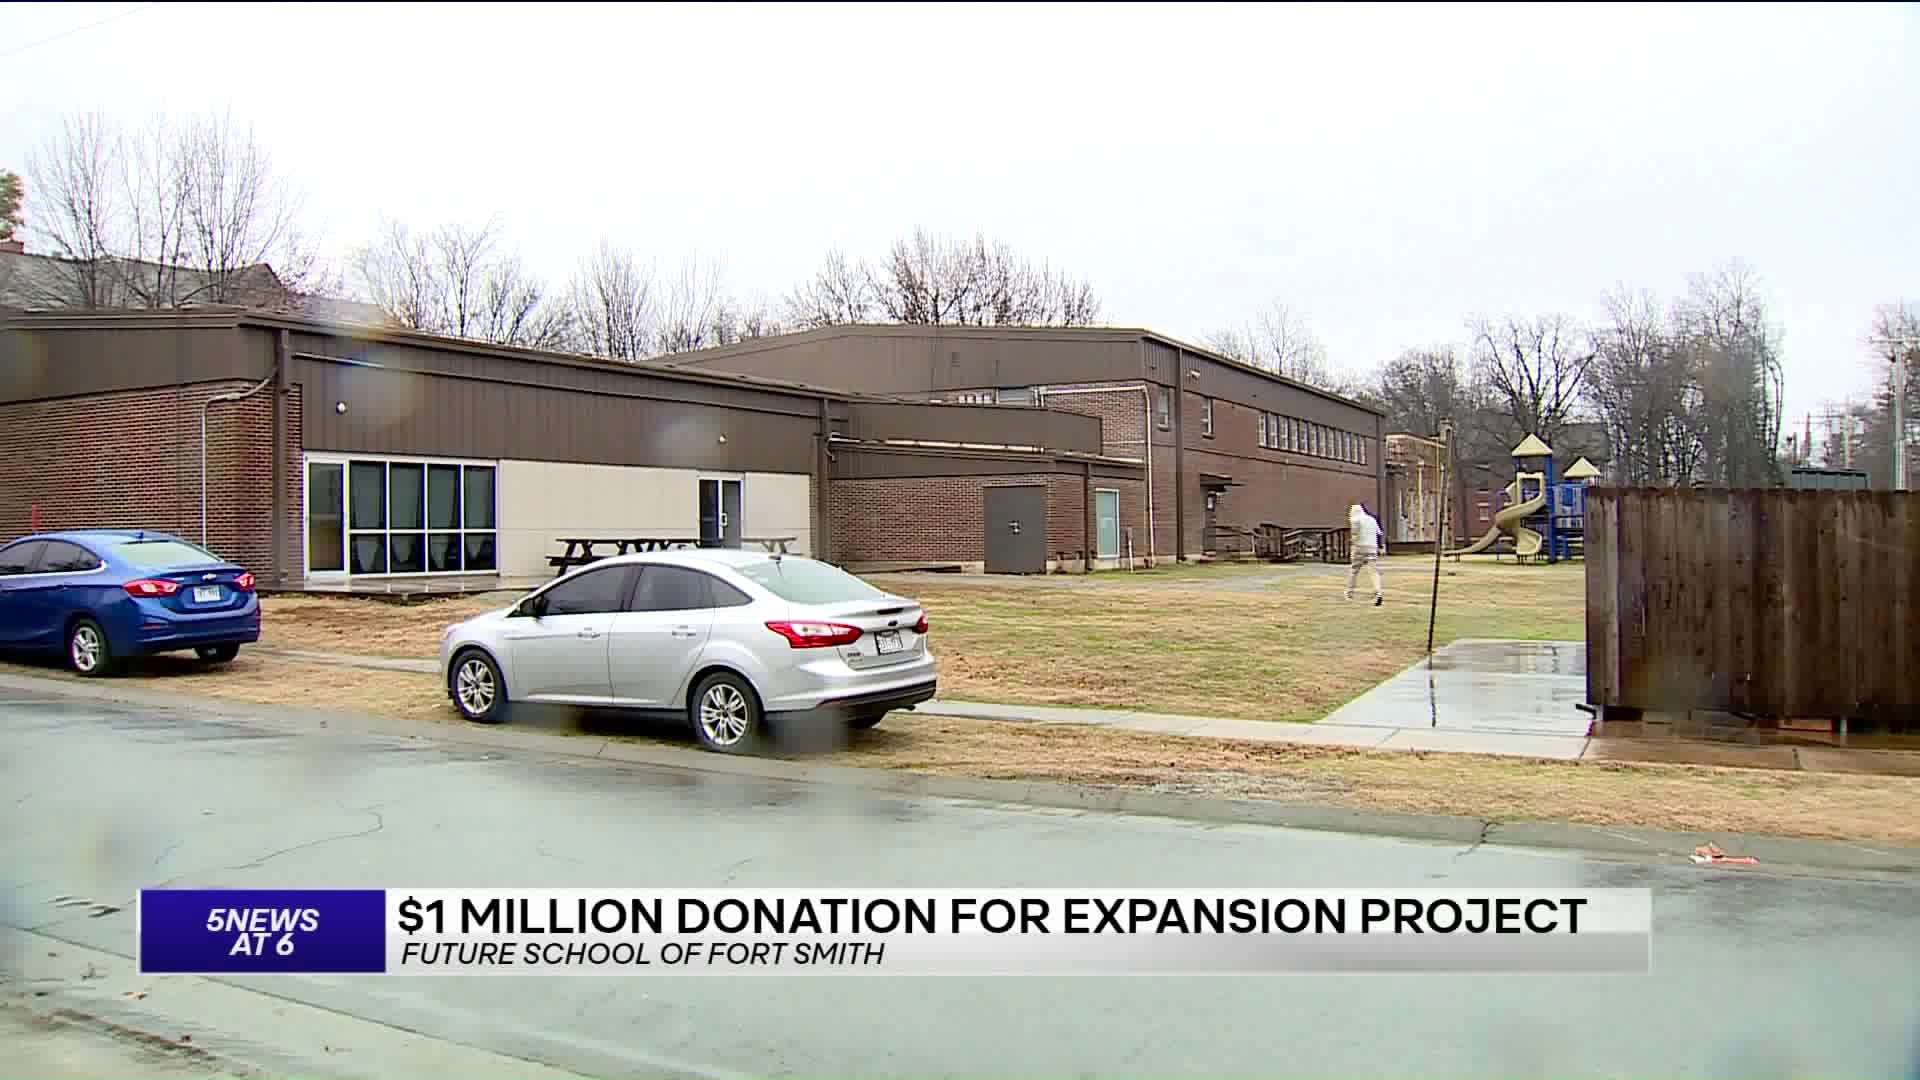 Details About The Future School Of Fort Smith Expansion Plan After $1M Donation